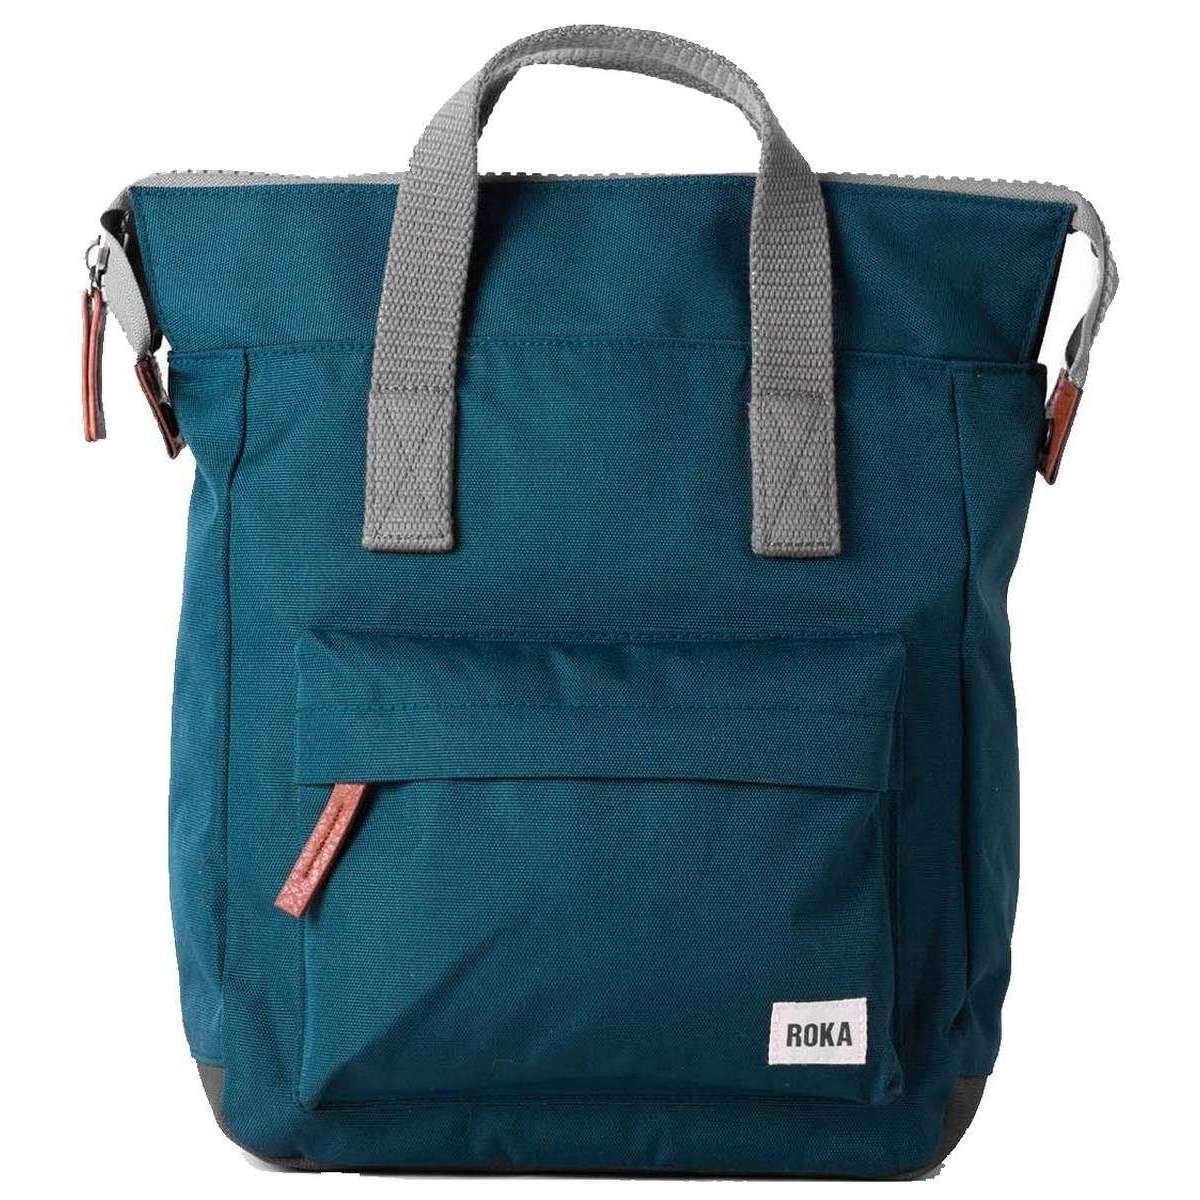 Roka Bantry B Small Sustainable Canvas Backpack - Teal Blue